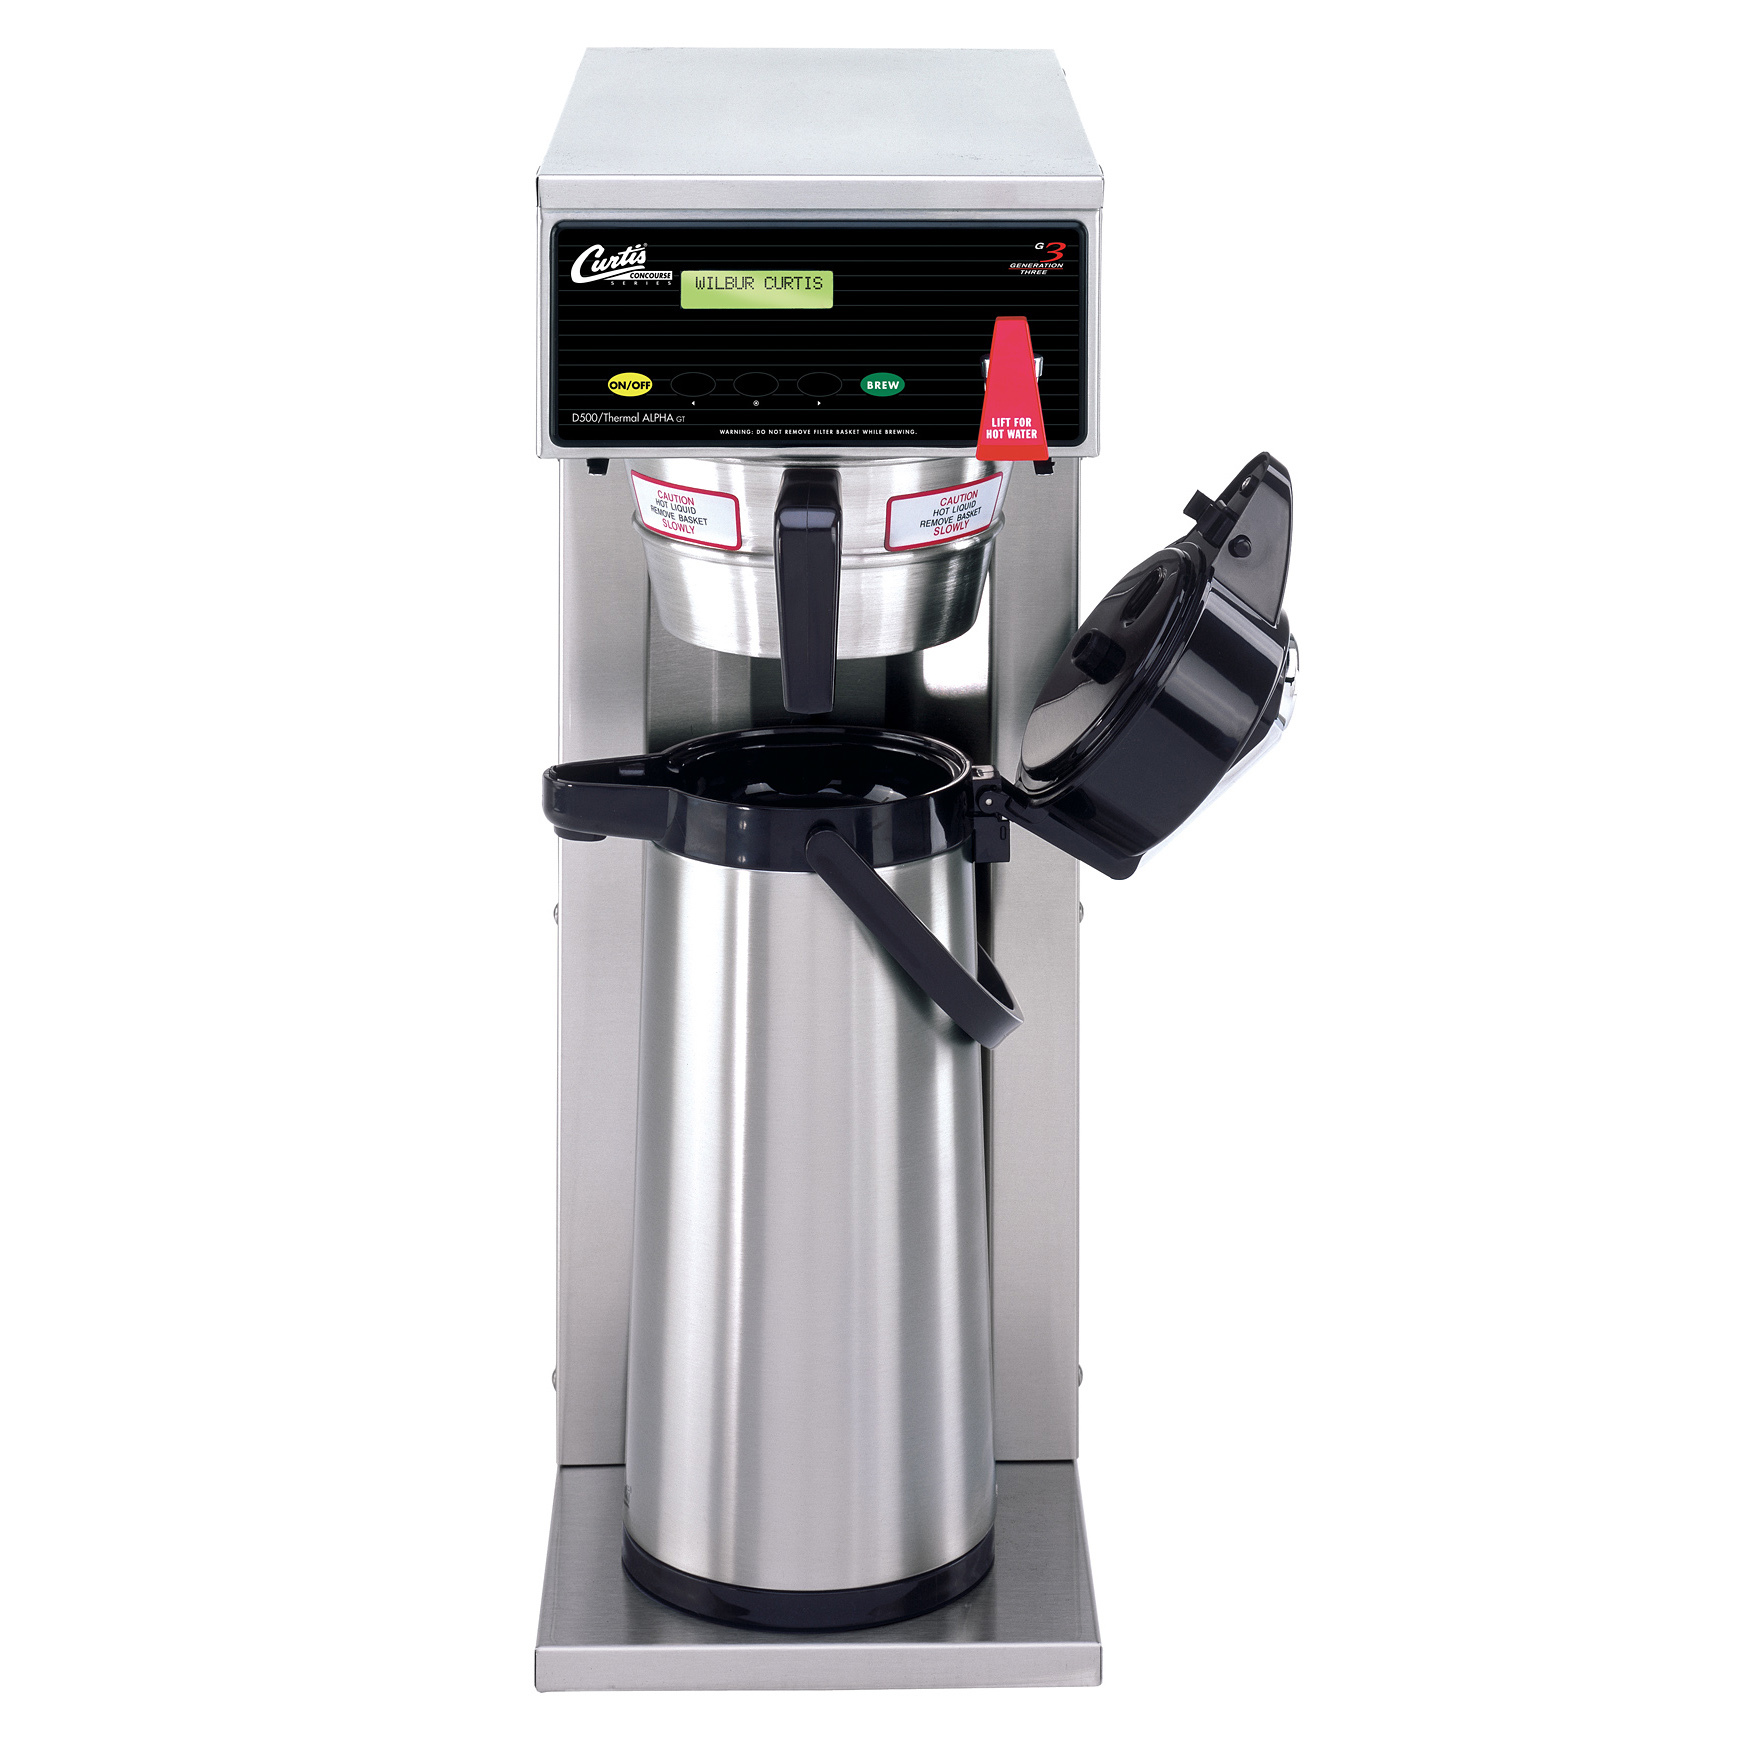 Wilbur Curtis G3 TCTS1000 Digital Iced Tea Brewer Brewing System - Used  Equipment Company